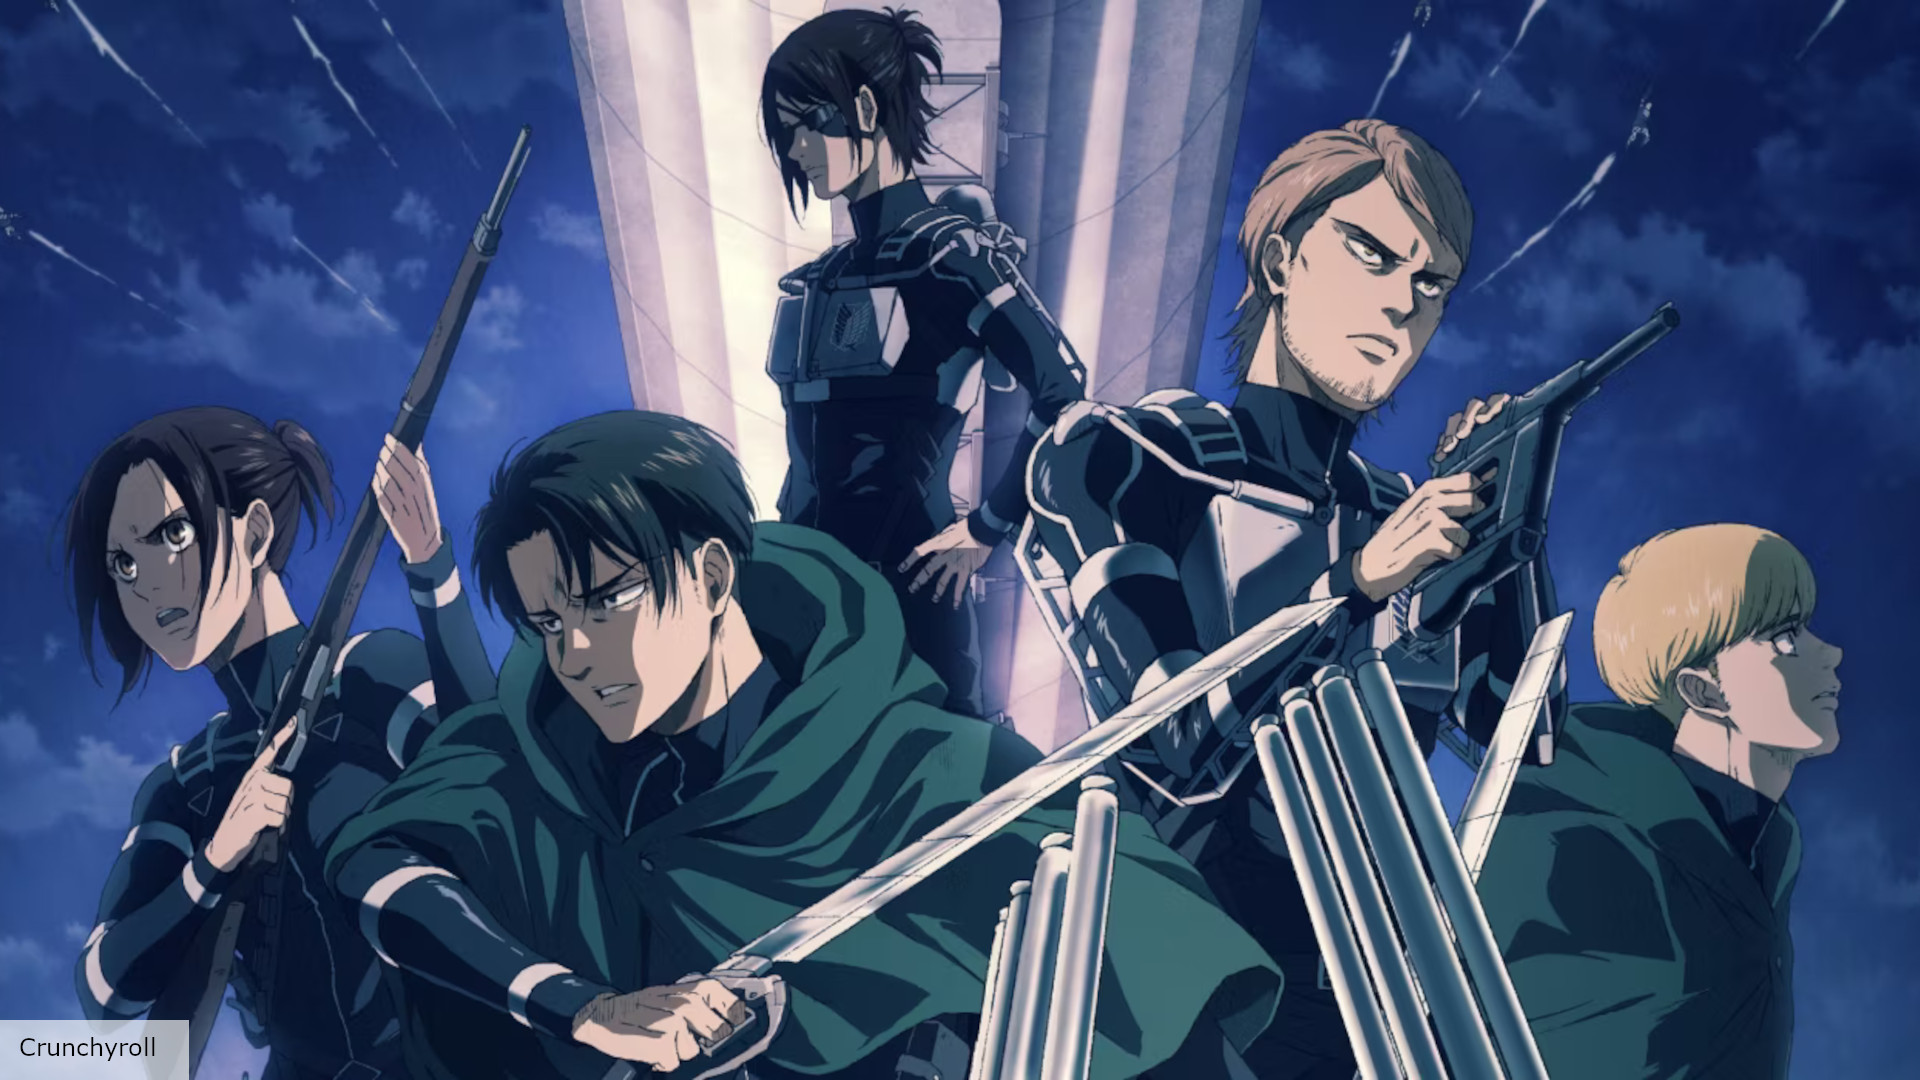 Attack on Titan Creator Hajime Isayama Addresses Ending and Teases  Imminent Climax For The Series  Manga Thrill